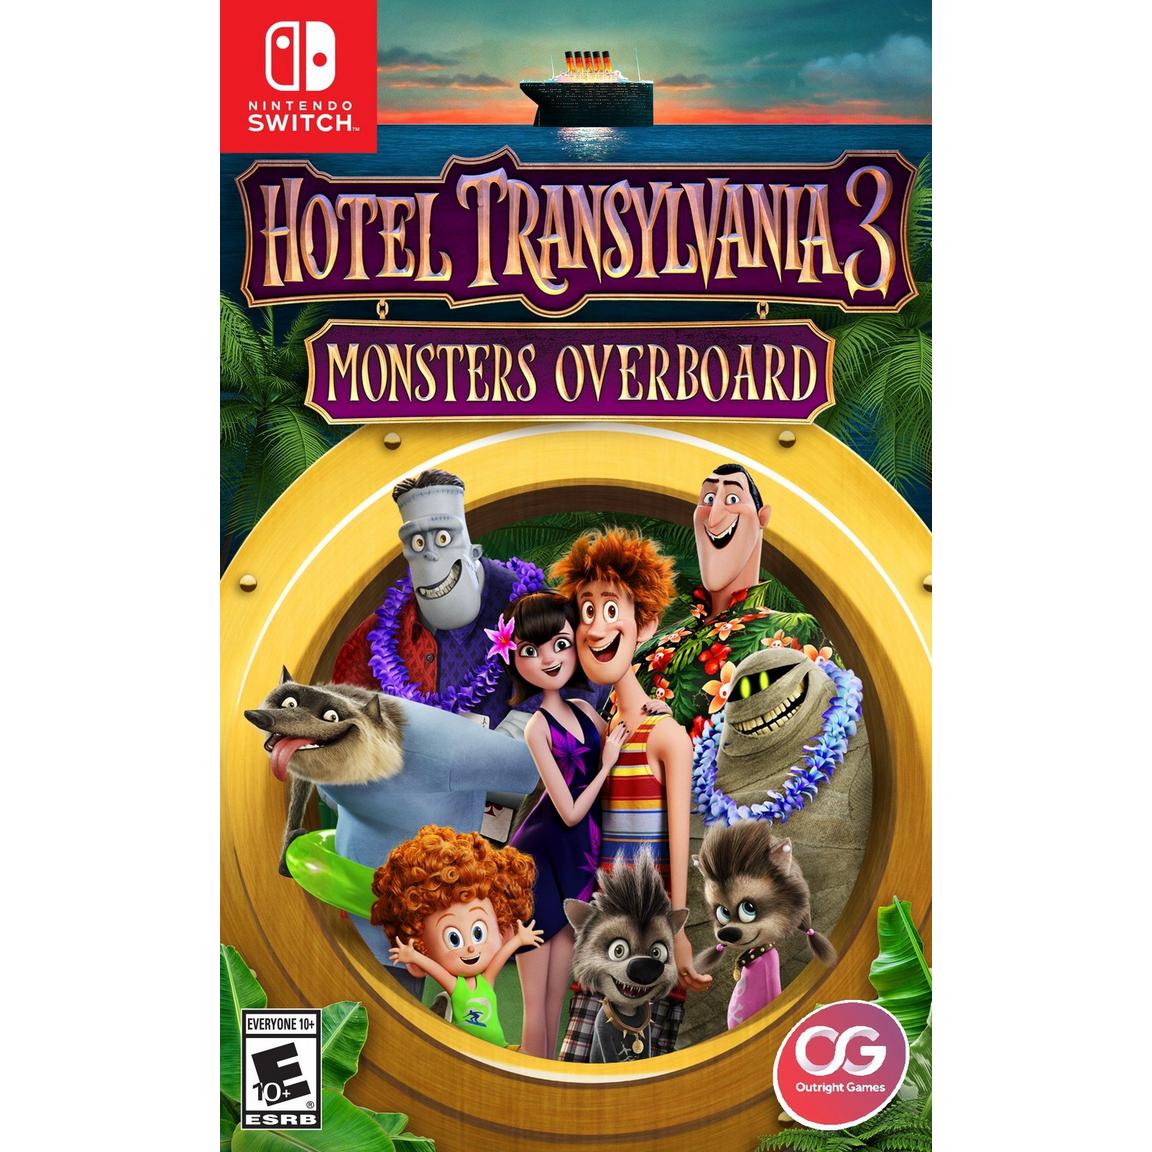 Hotel Transylvania 3: Monsters Overboard - Nintendo Switch, Pre-Owned